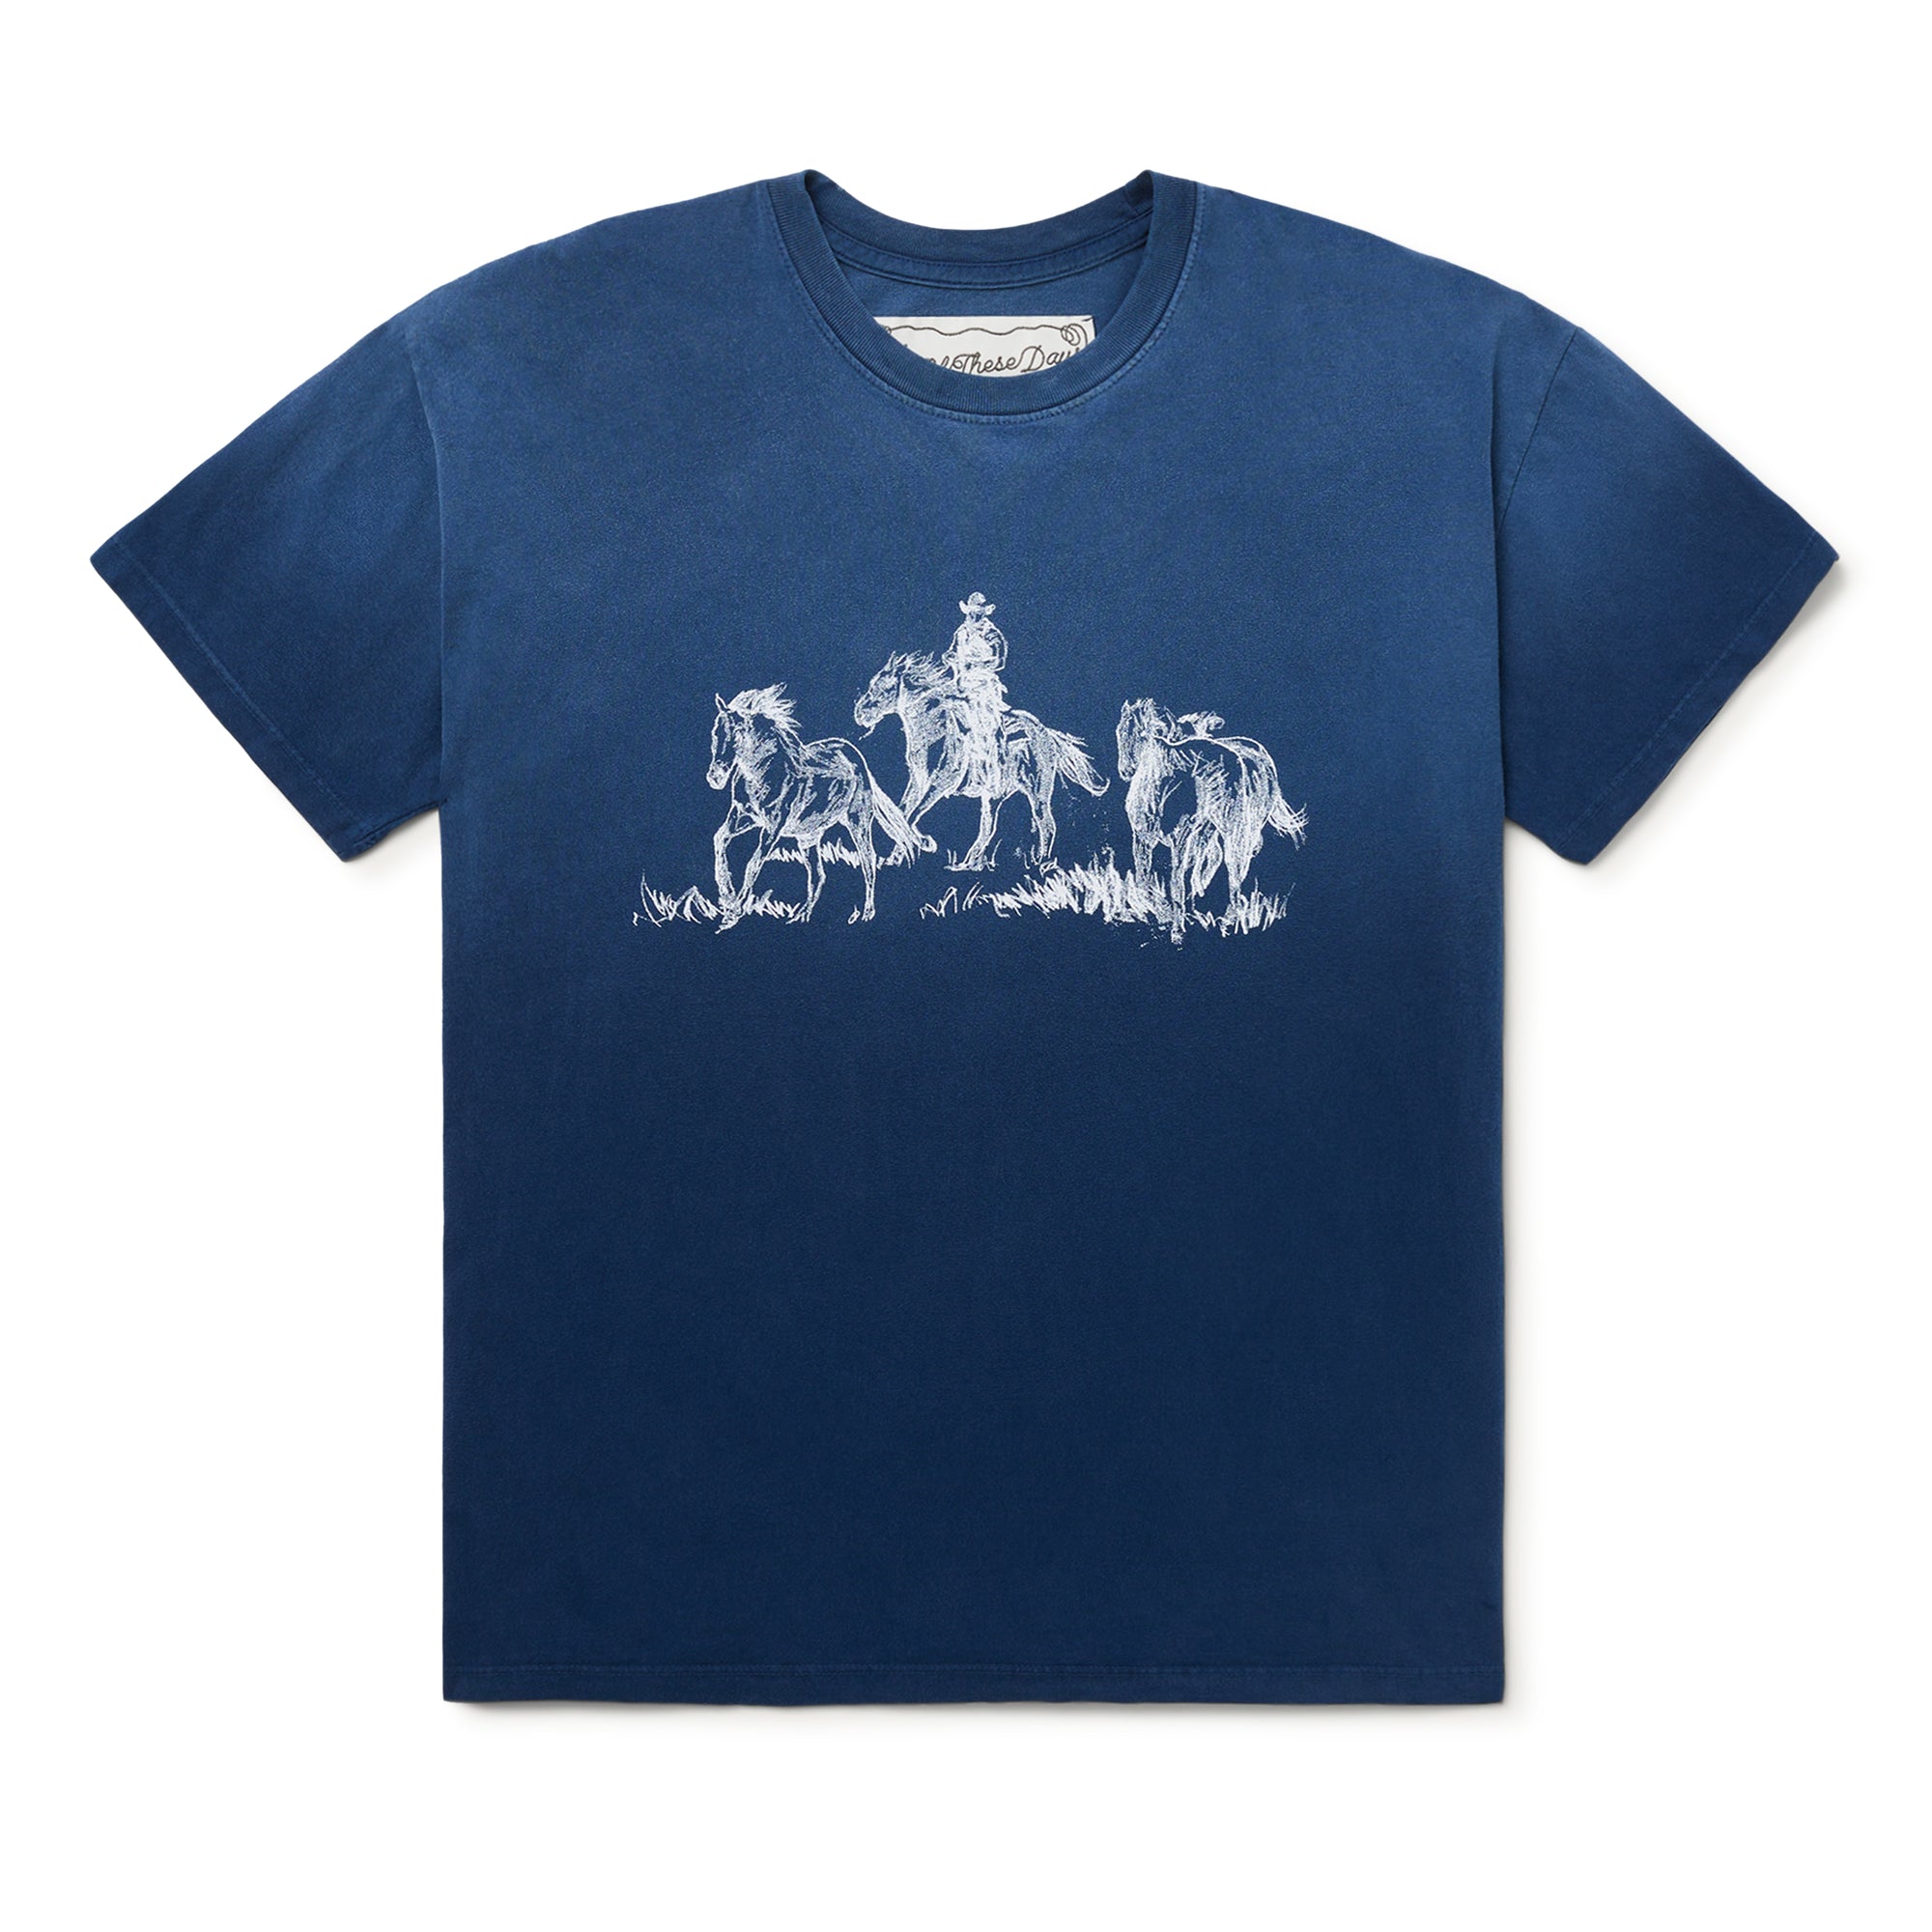 One of These Days - Goodbye - Tee - (Navy) view 1